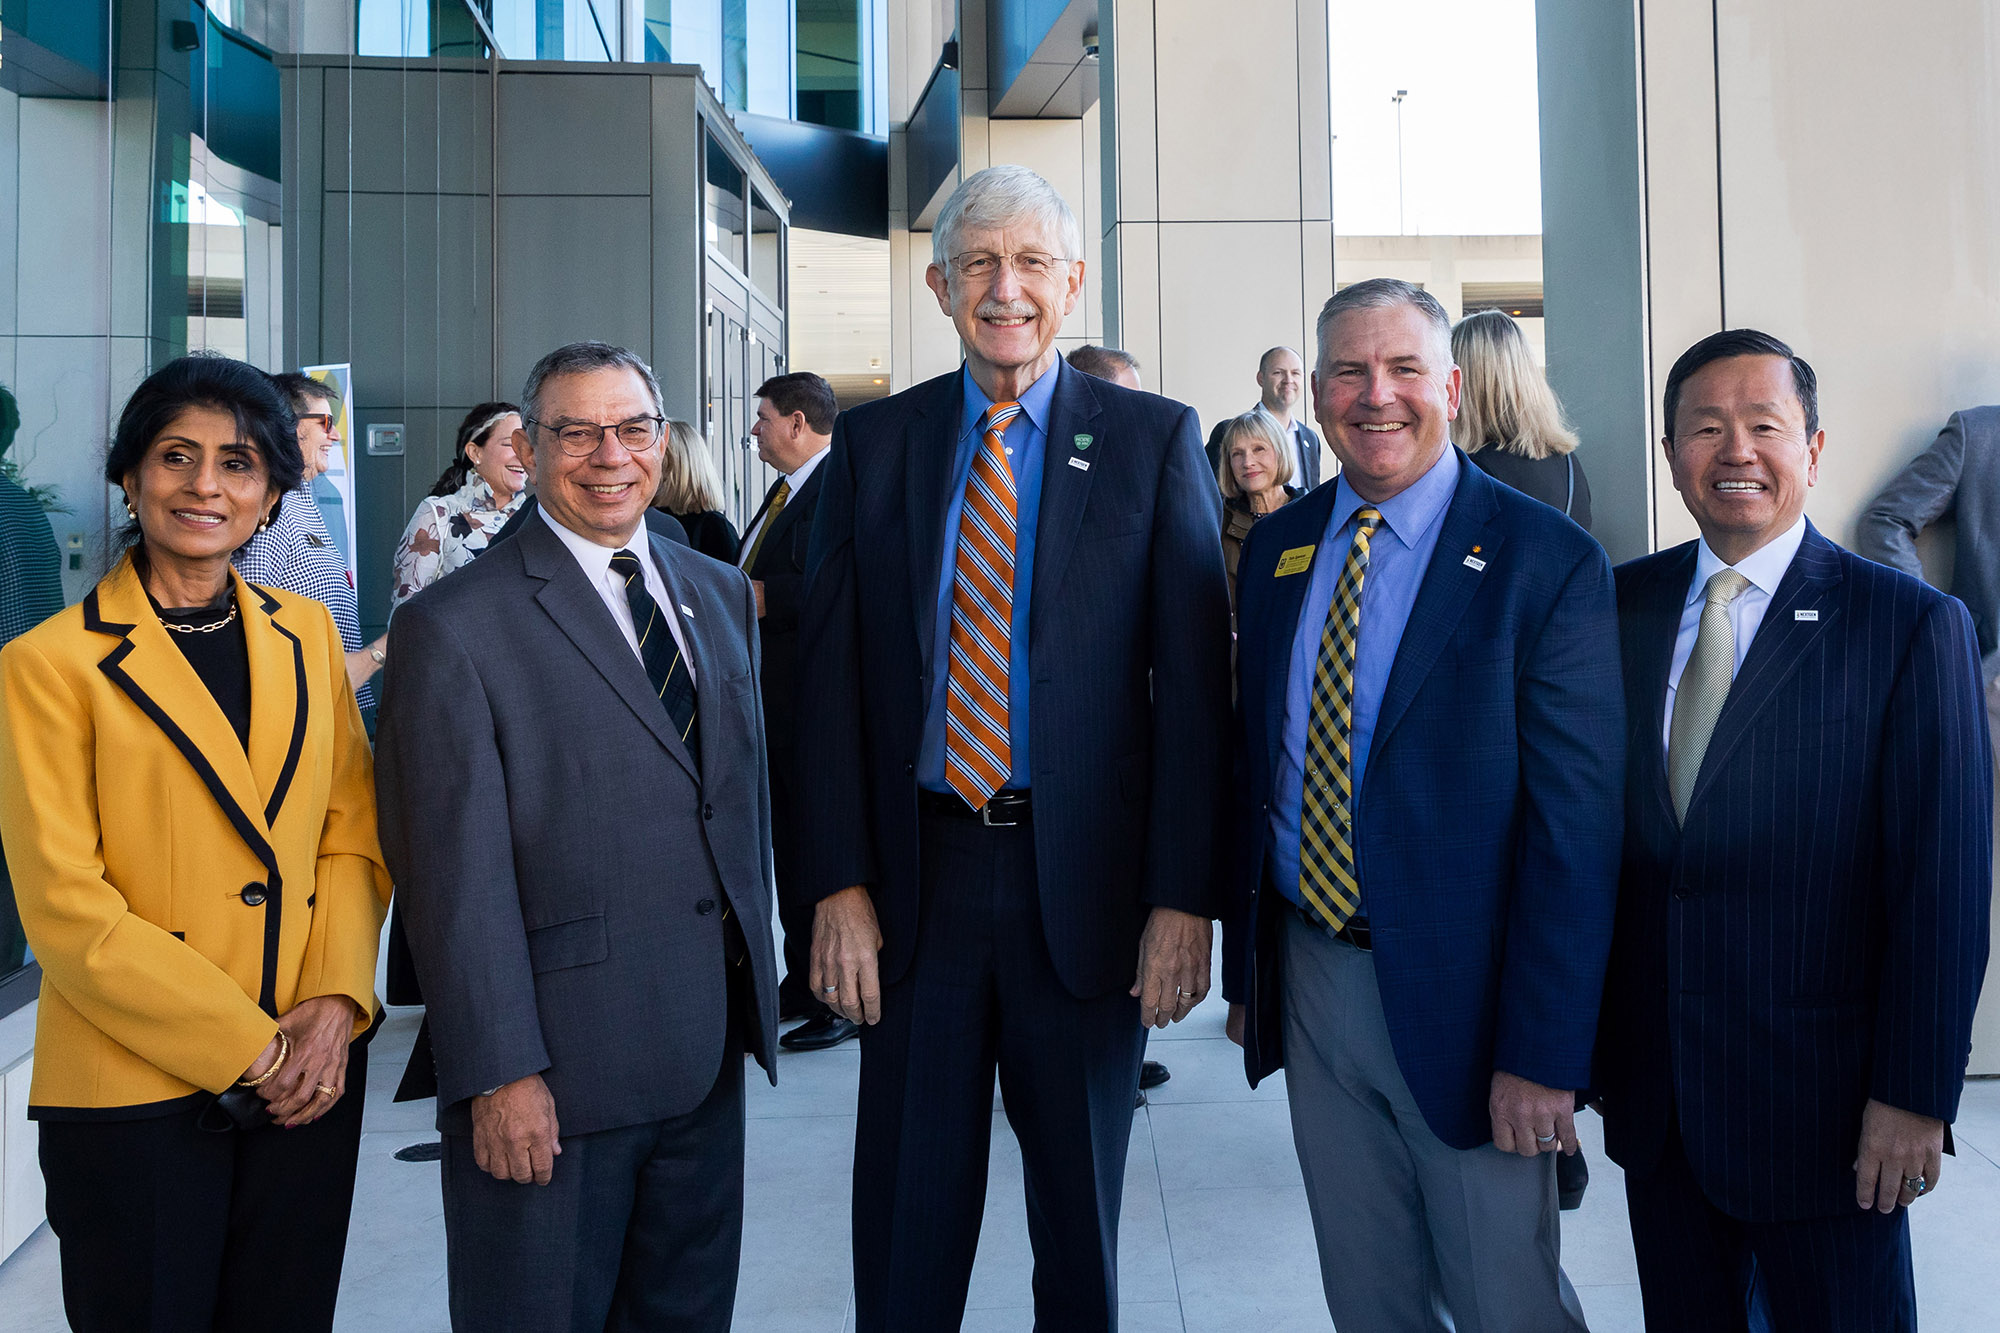 photo of provost ramchand, richard barohn, francis collins, tom spencer and mun choi